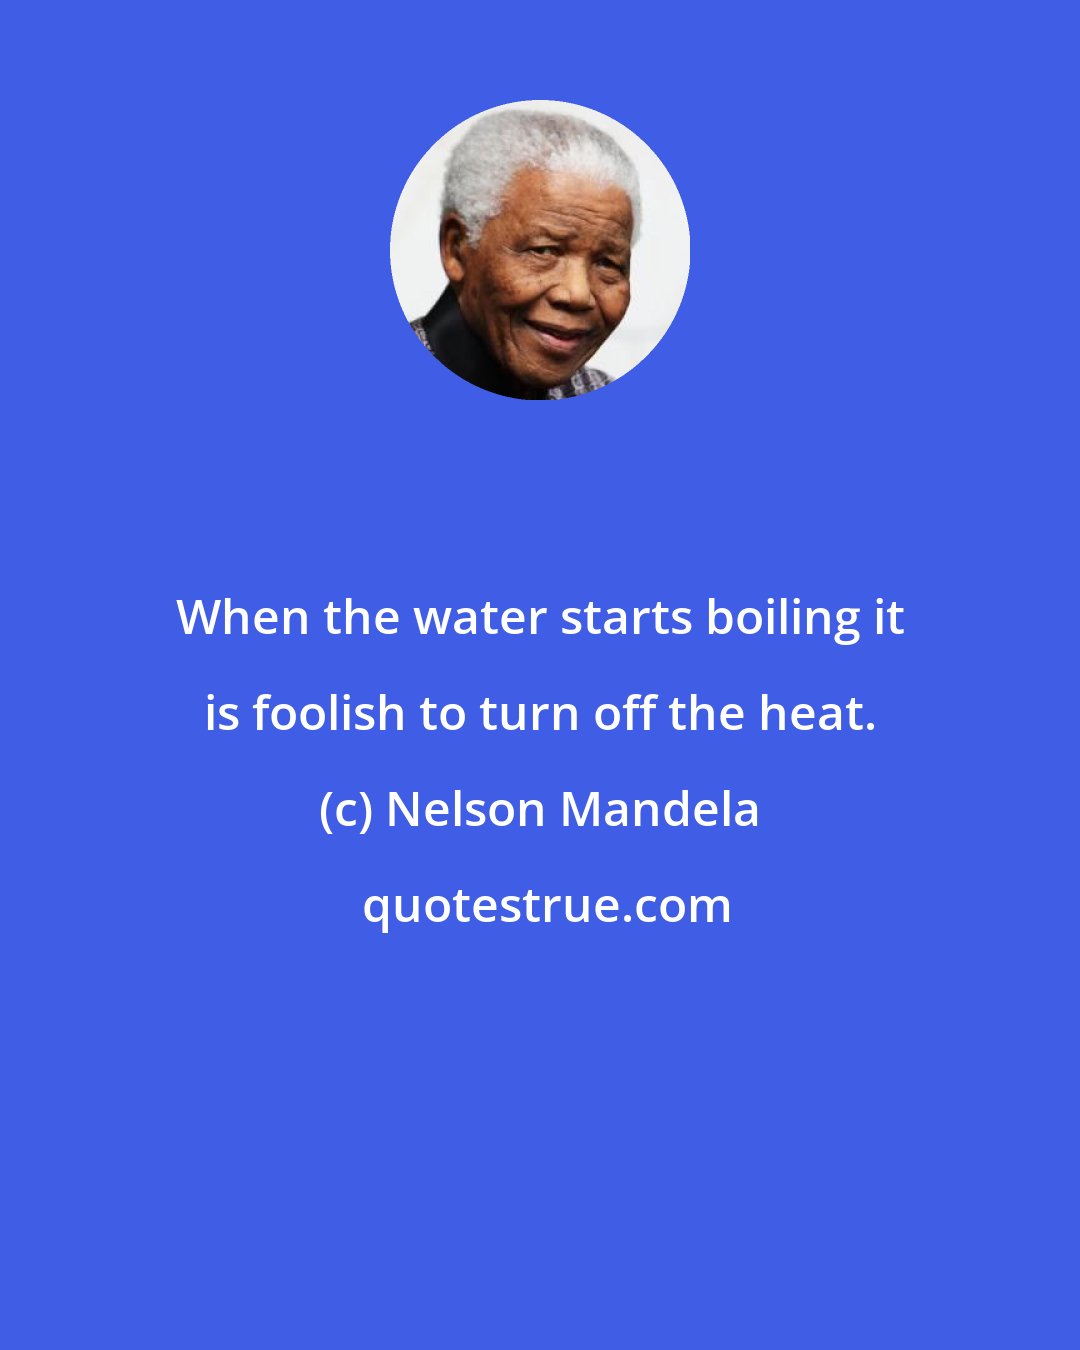 Nelson Mandela: When the water starts boiling it is foolish to turn off the heat.